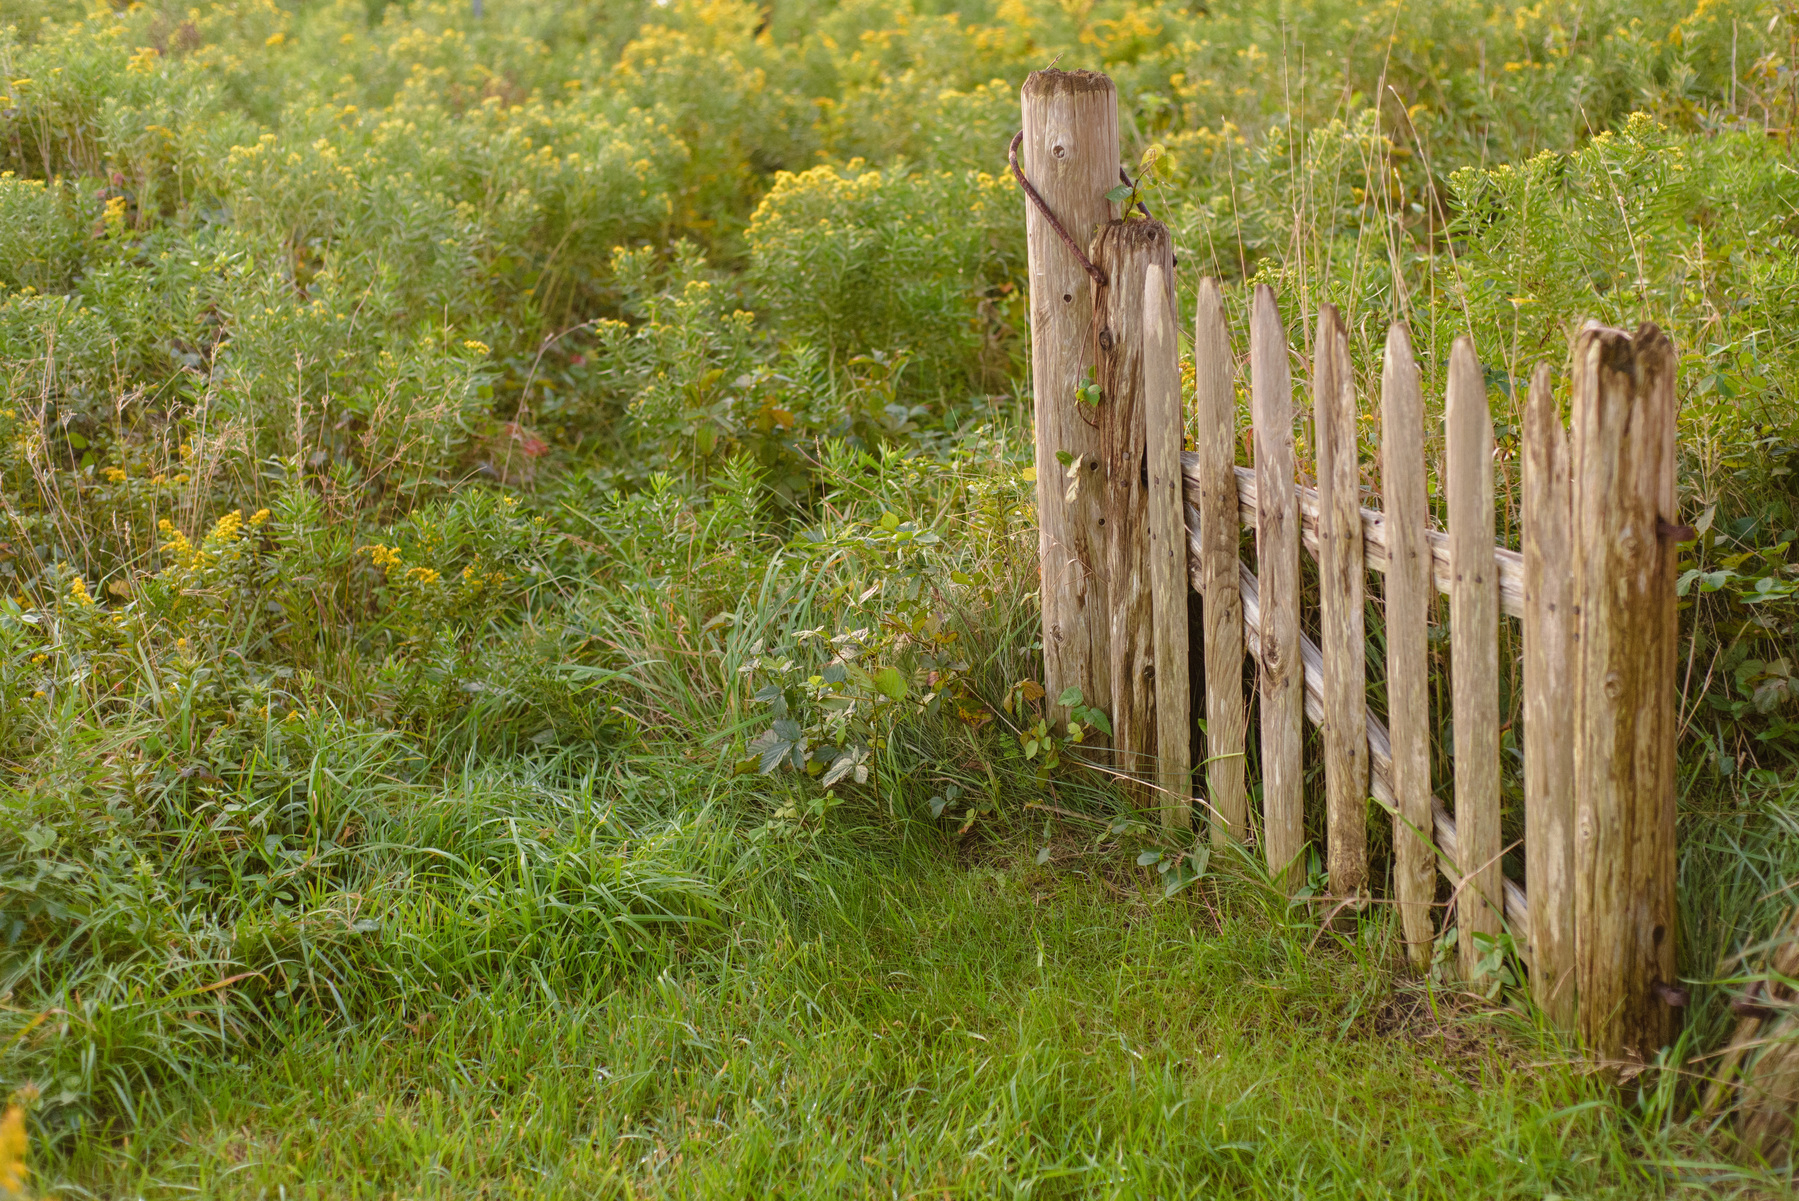 Old wooden gate and field of wildflowers.